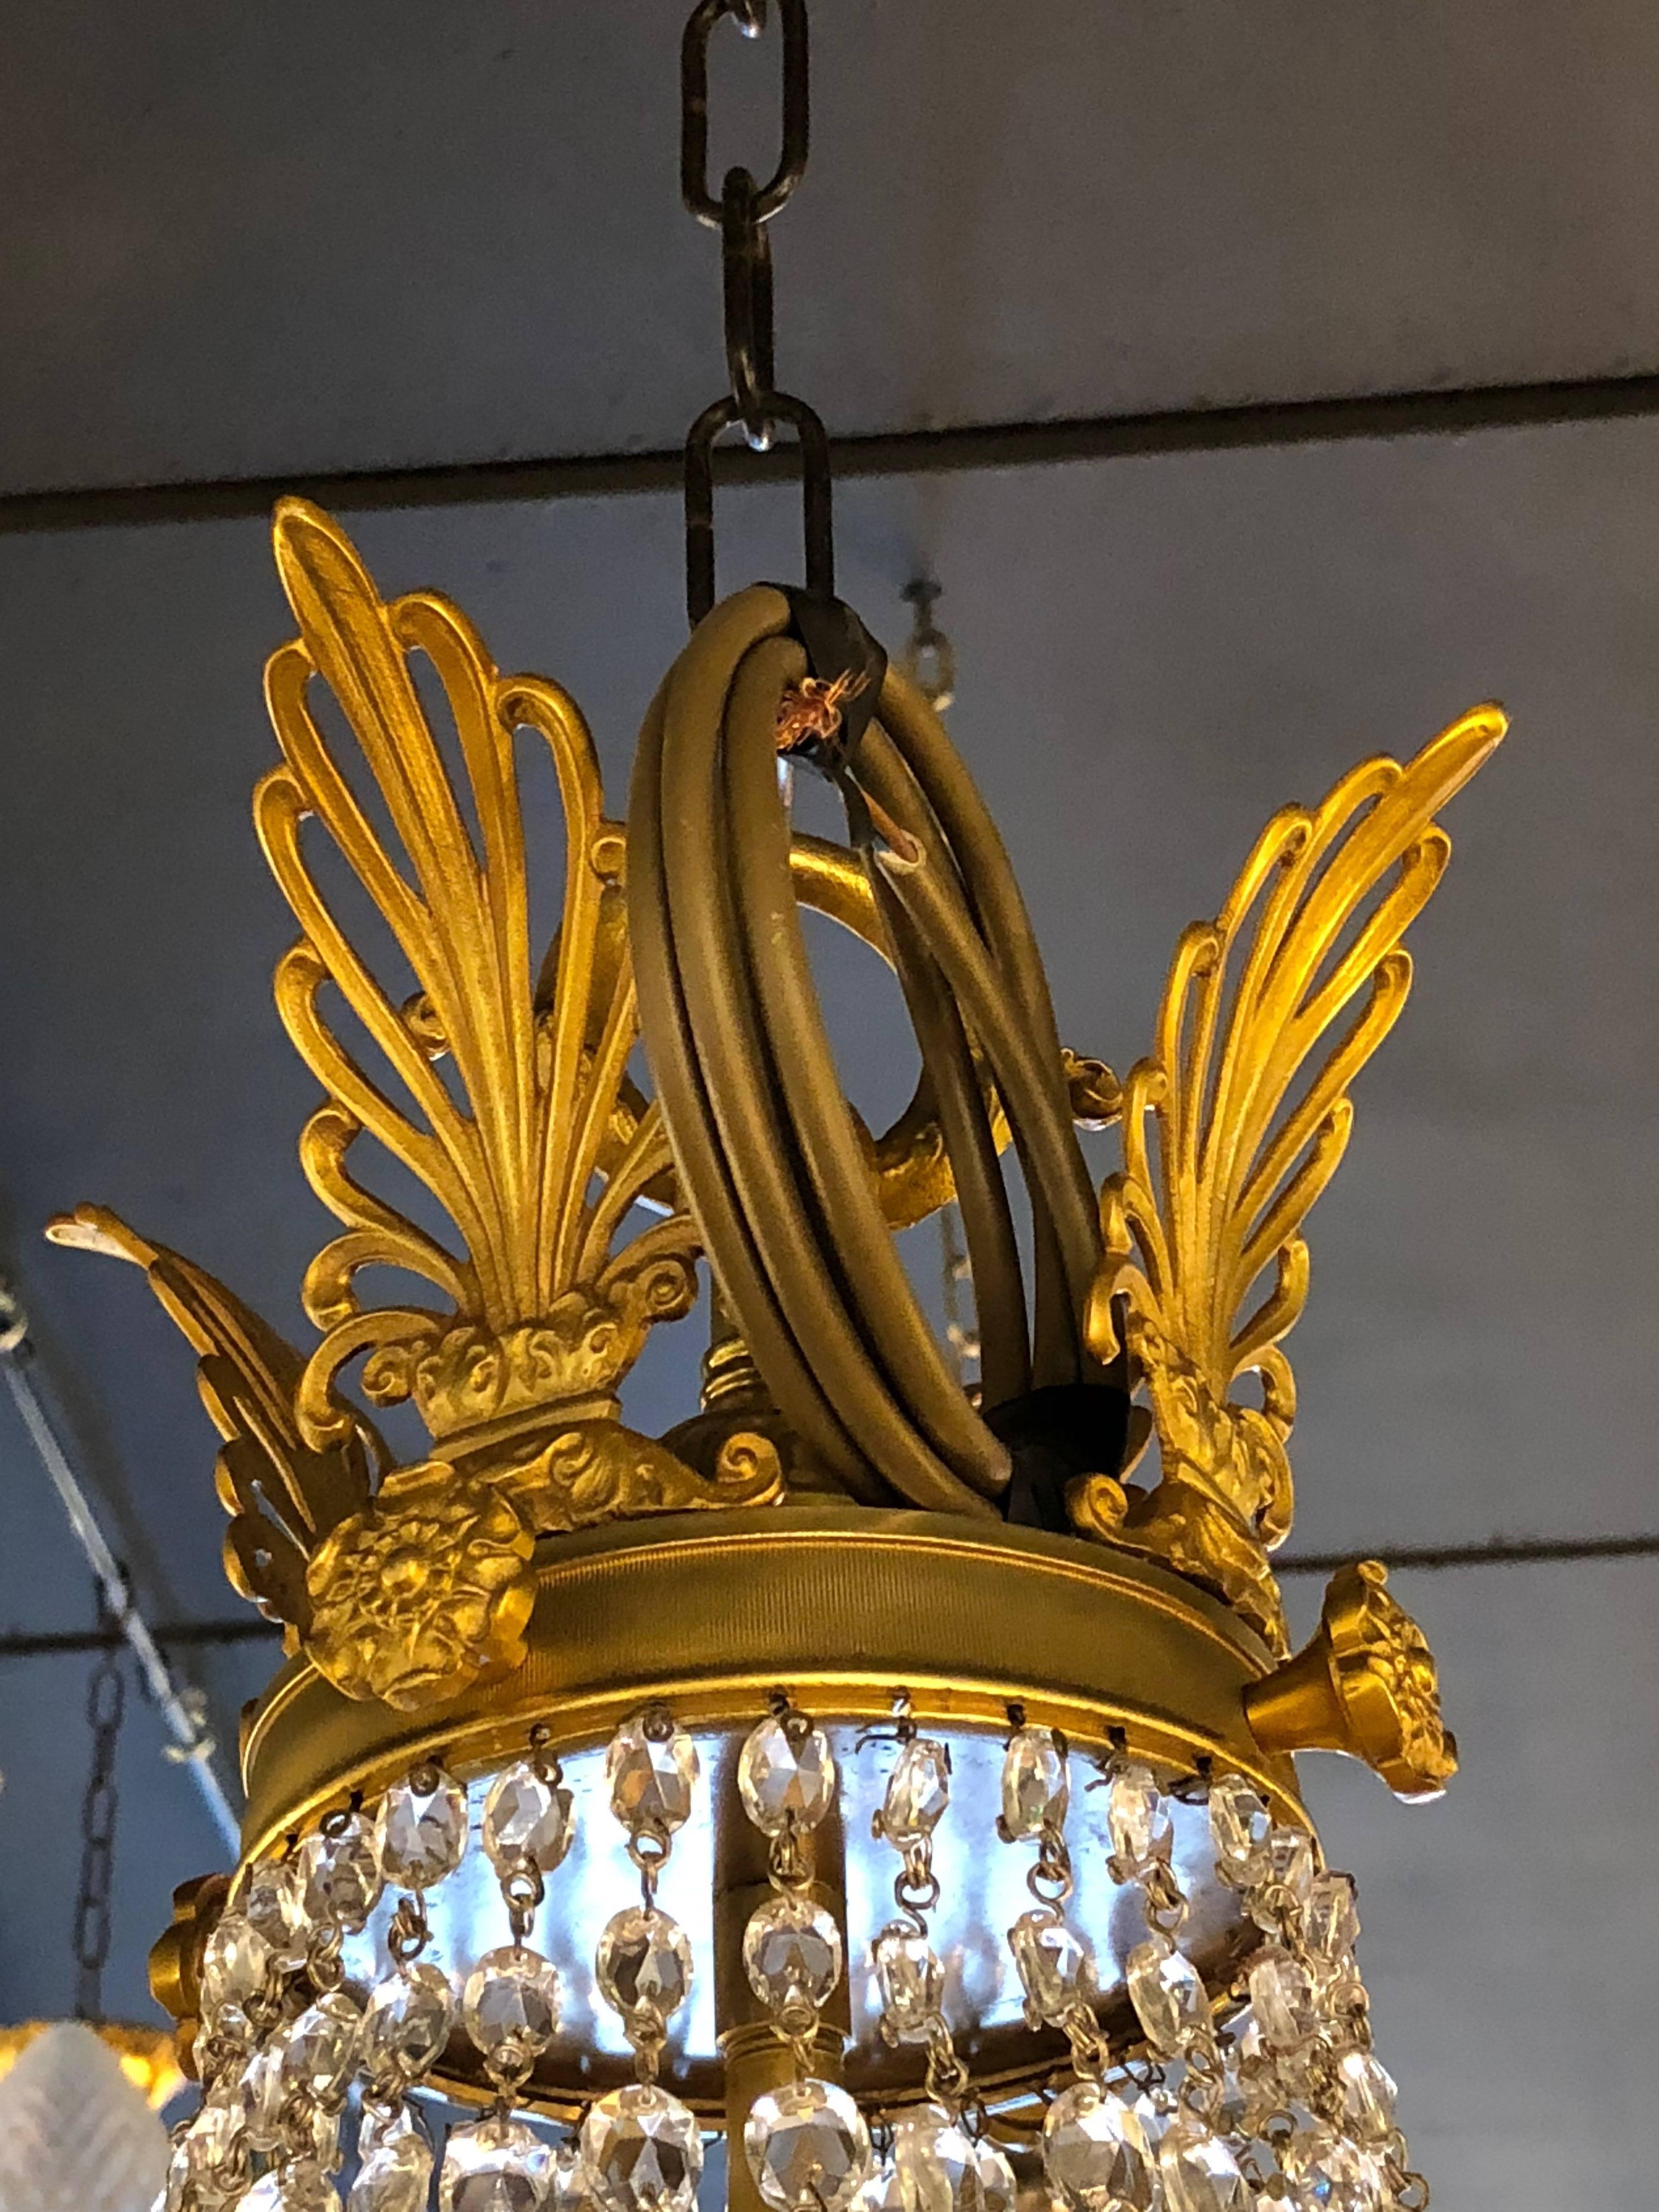 French Second Empire Gilt Bronze Chandelier with 4 x 2 Arms In Excellent Condition For Sale In Heemskerk, Noord Holland